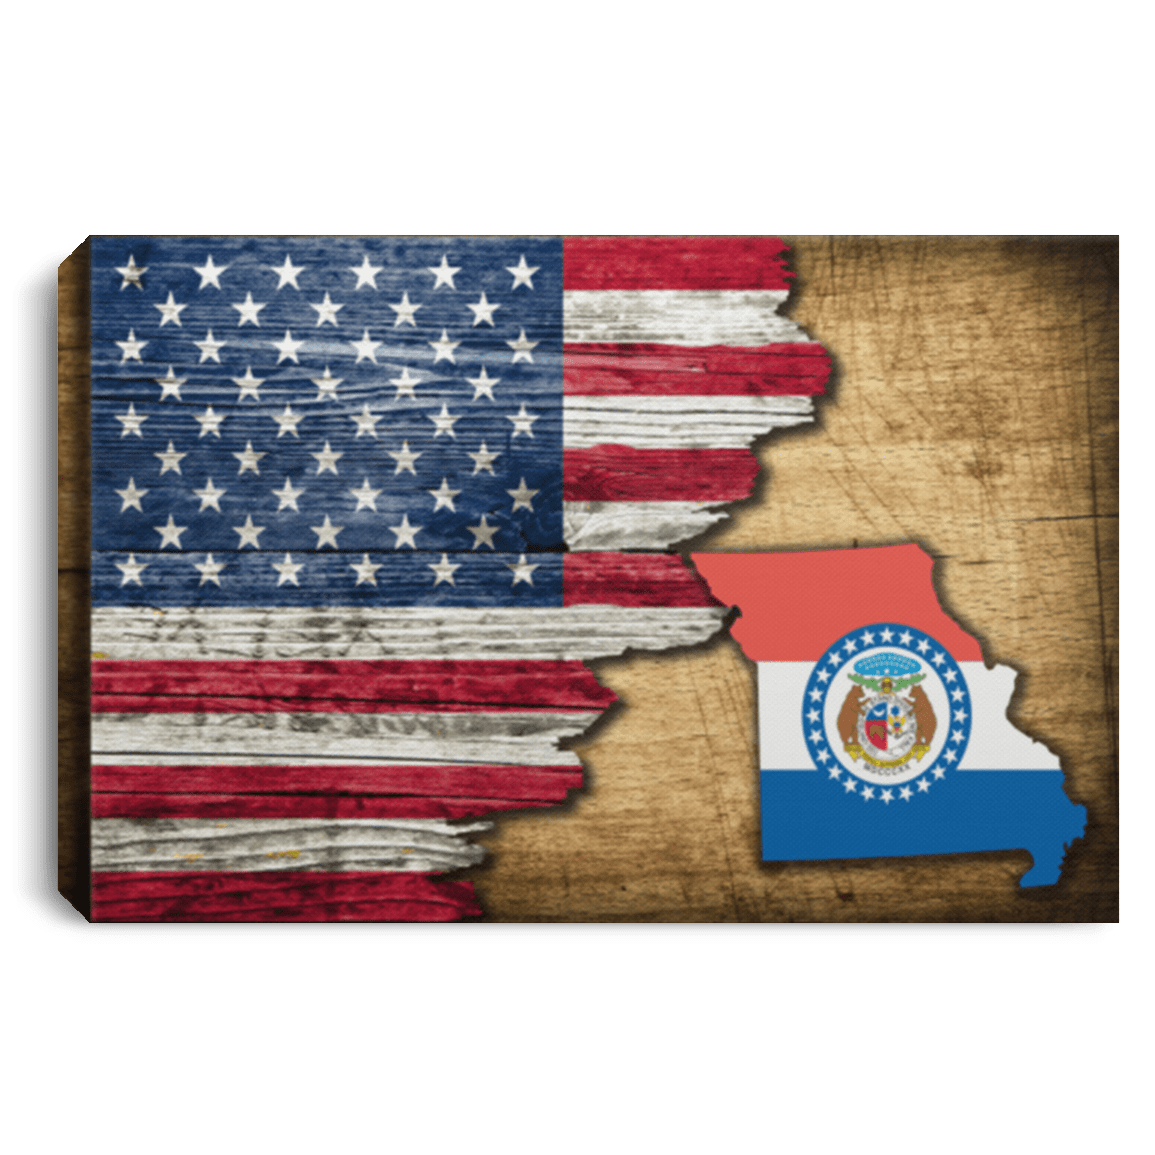 United States/Missouri Flag Ripped Effect 12X8 Inches Landscape Canvas .75In Frame